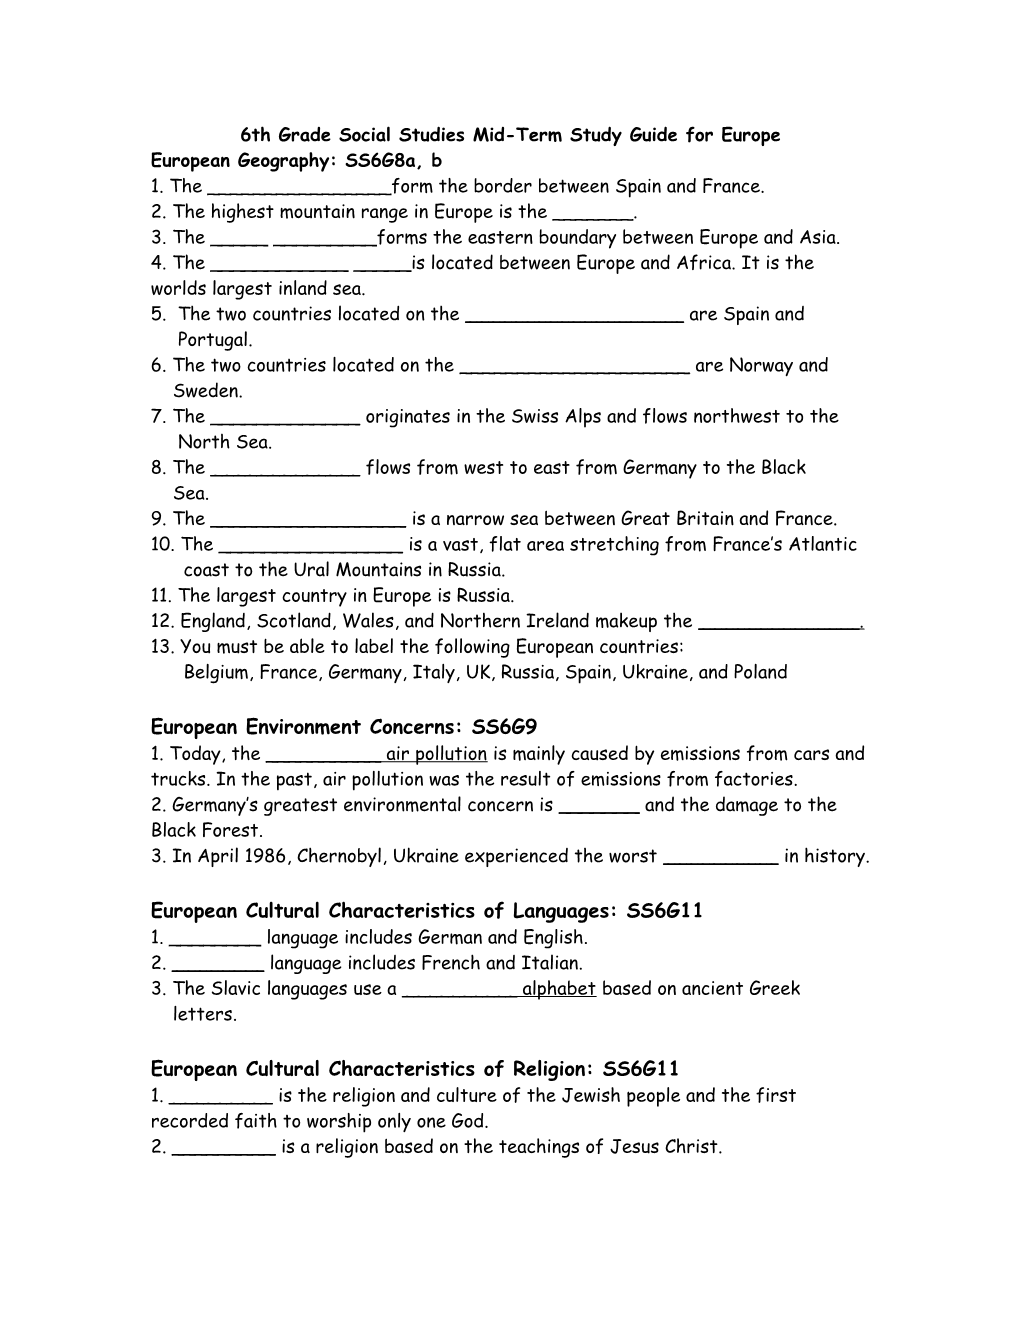 6Th Grade Social Studies Mid-Term Study Guide for Europe